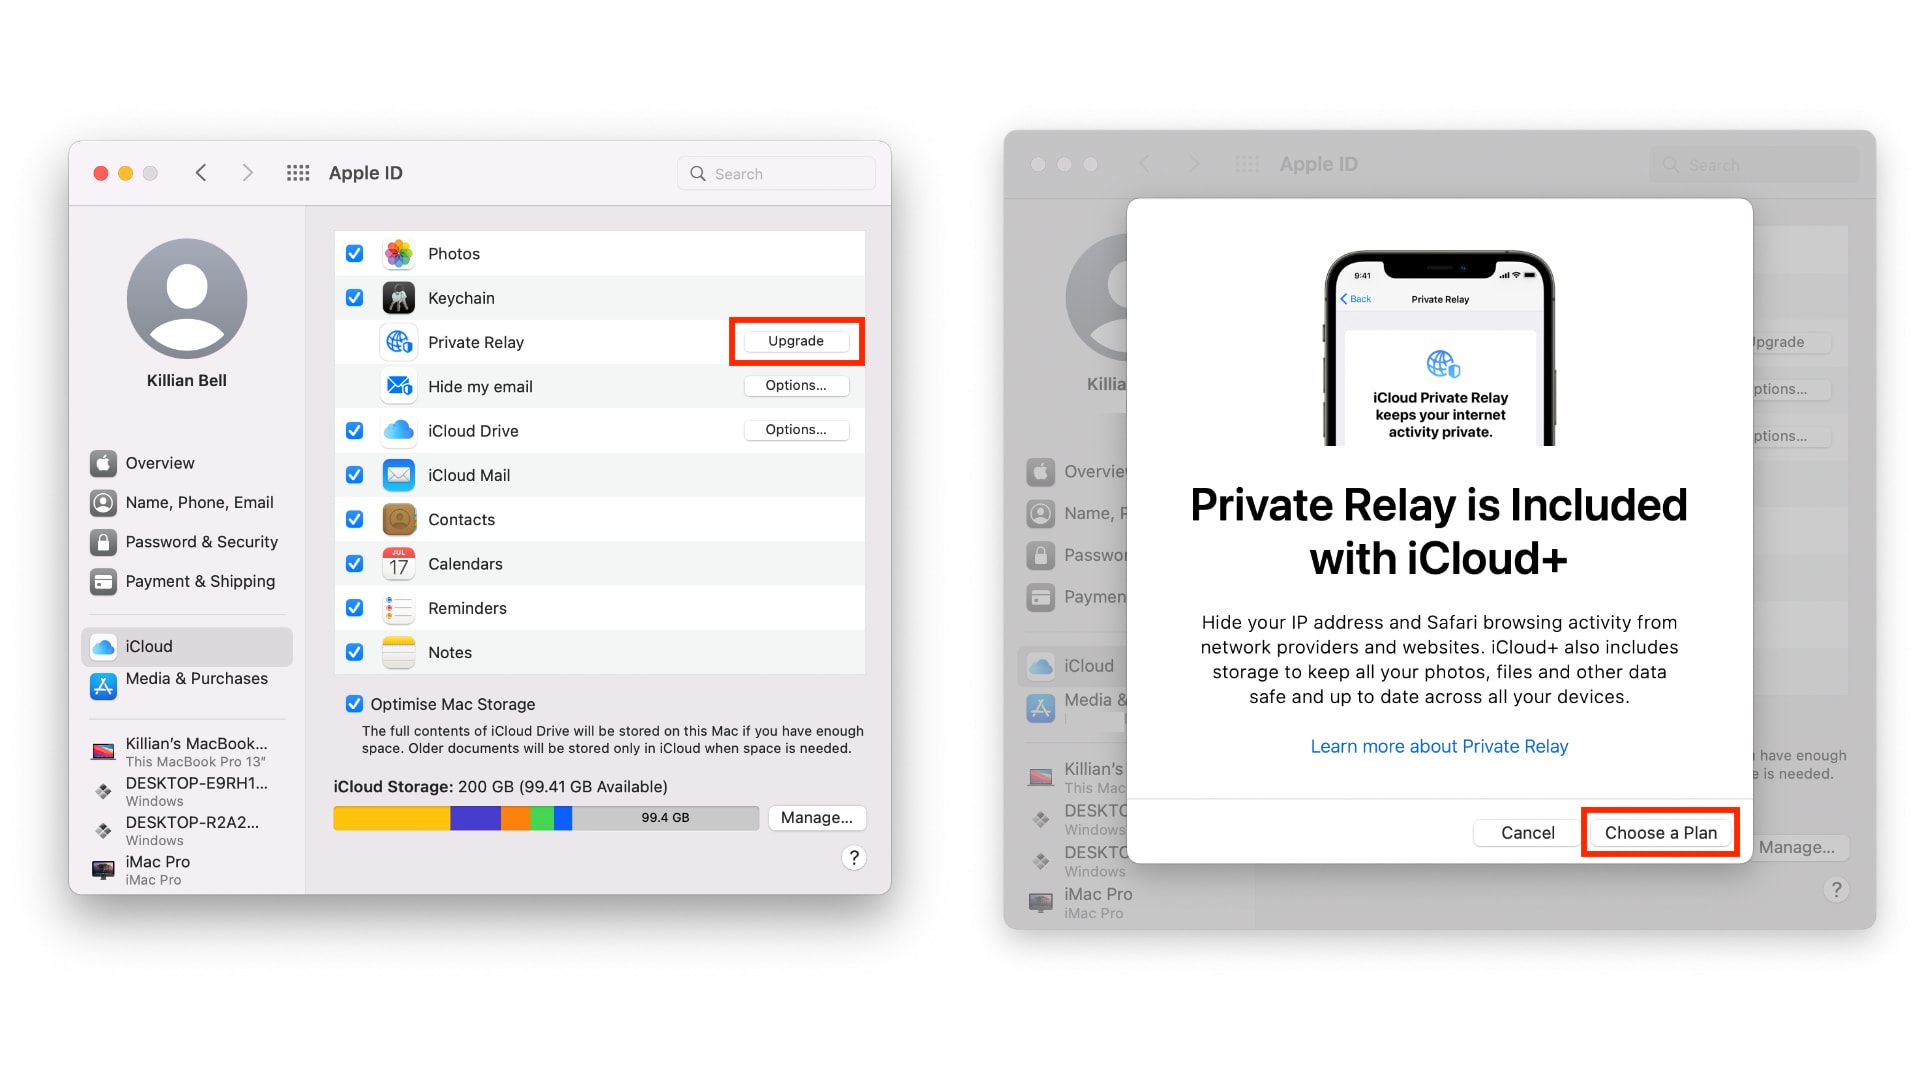 How to enable iCloud Private Relay